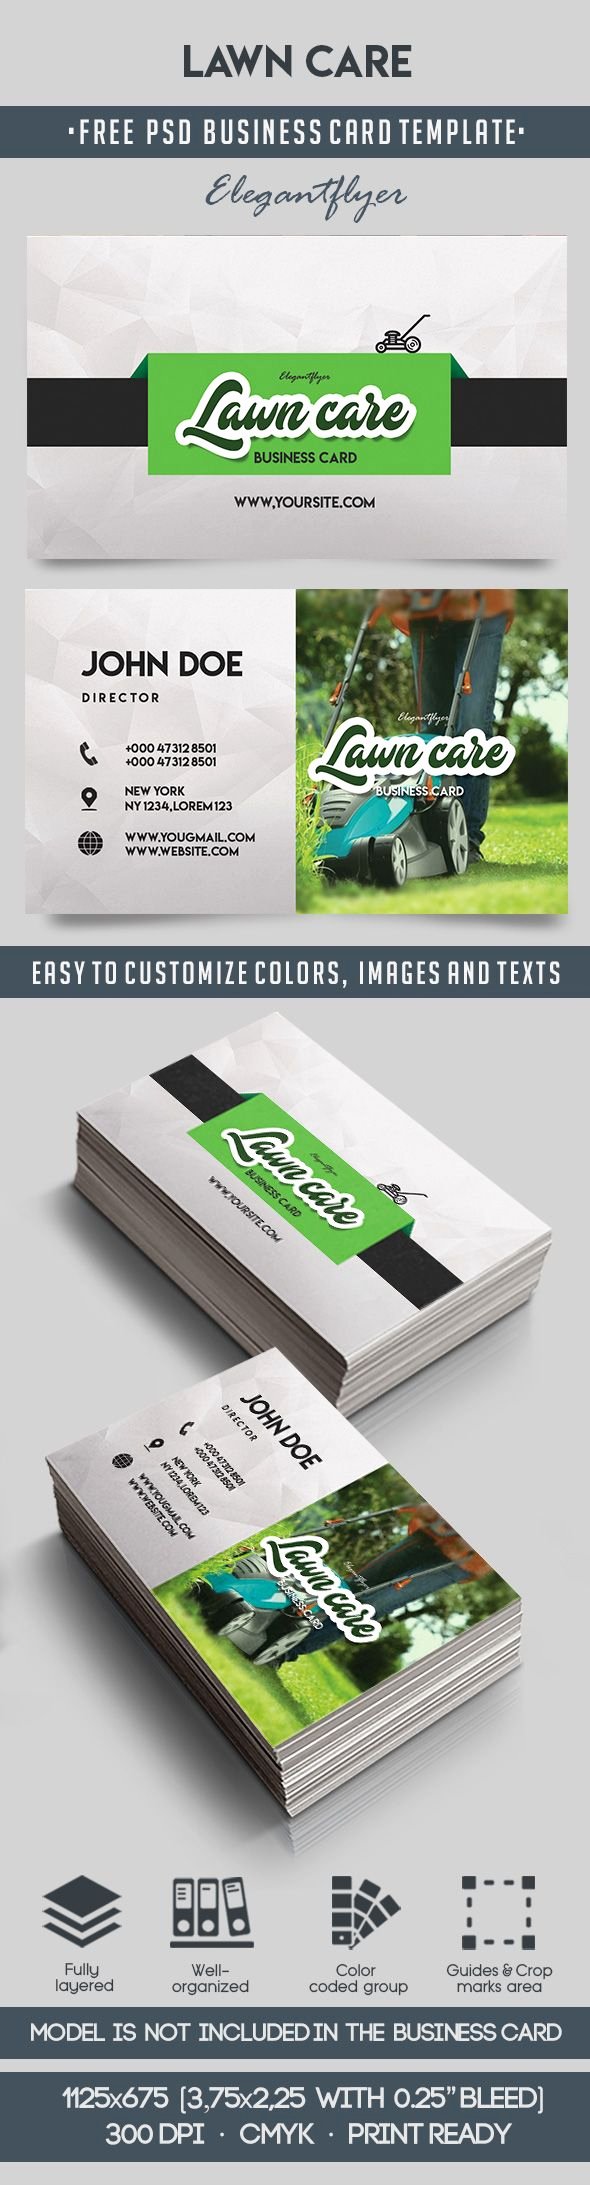 Landscaping Business Card Template Fresh Lawn Care – Free Business Card Templates Psd – by Elegantflyer